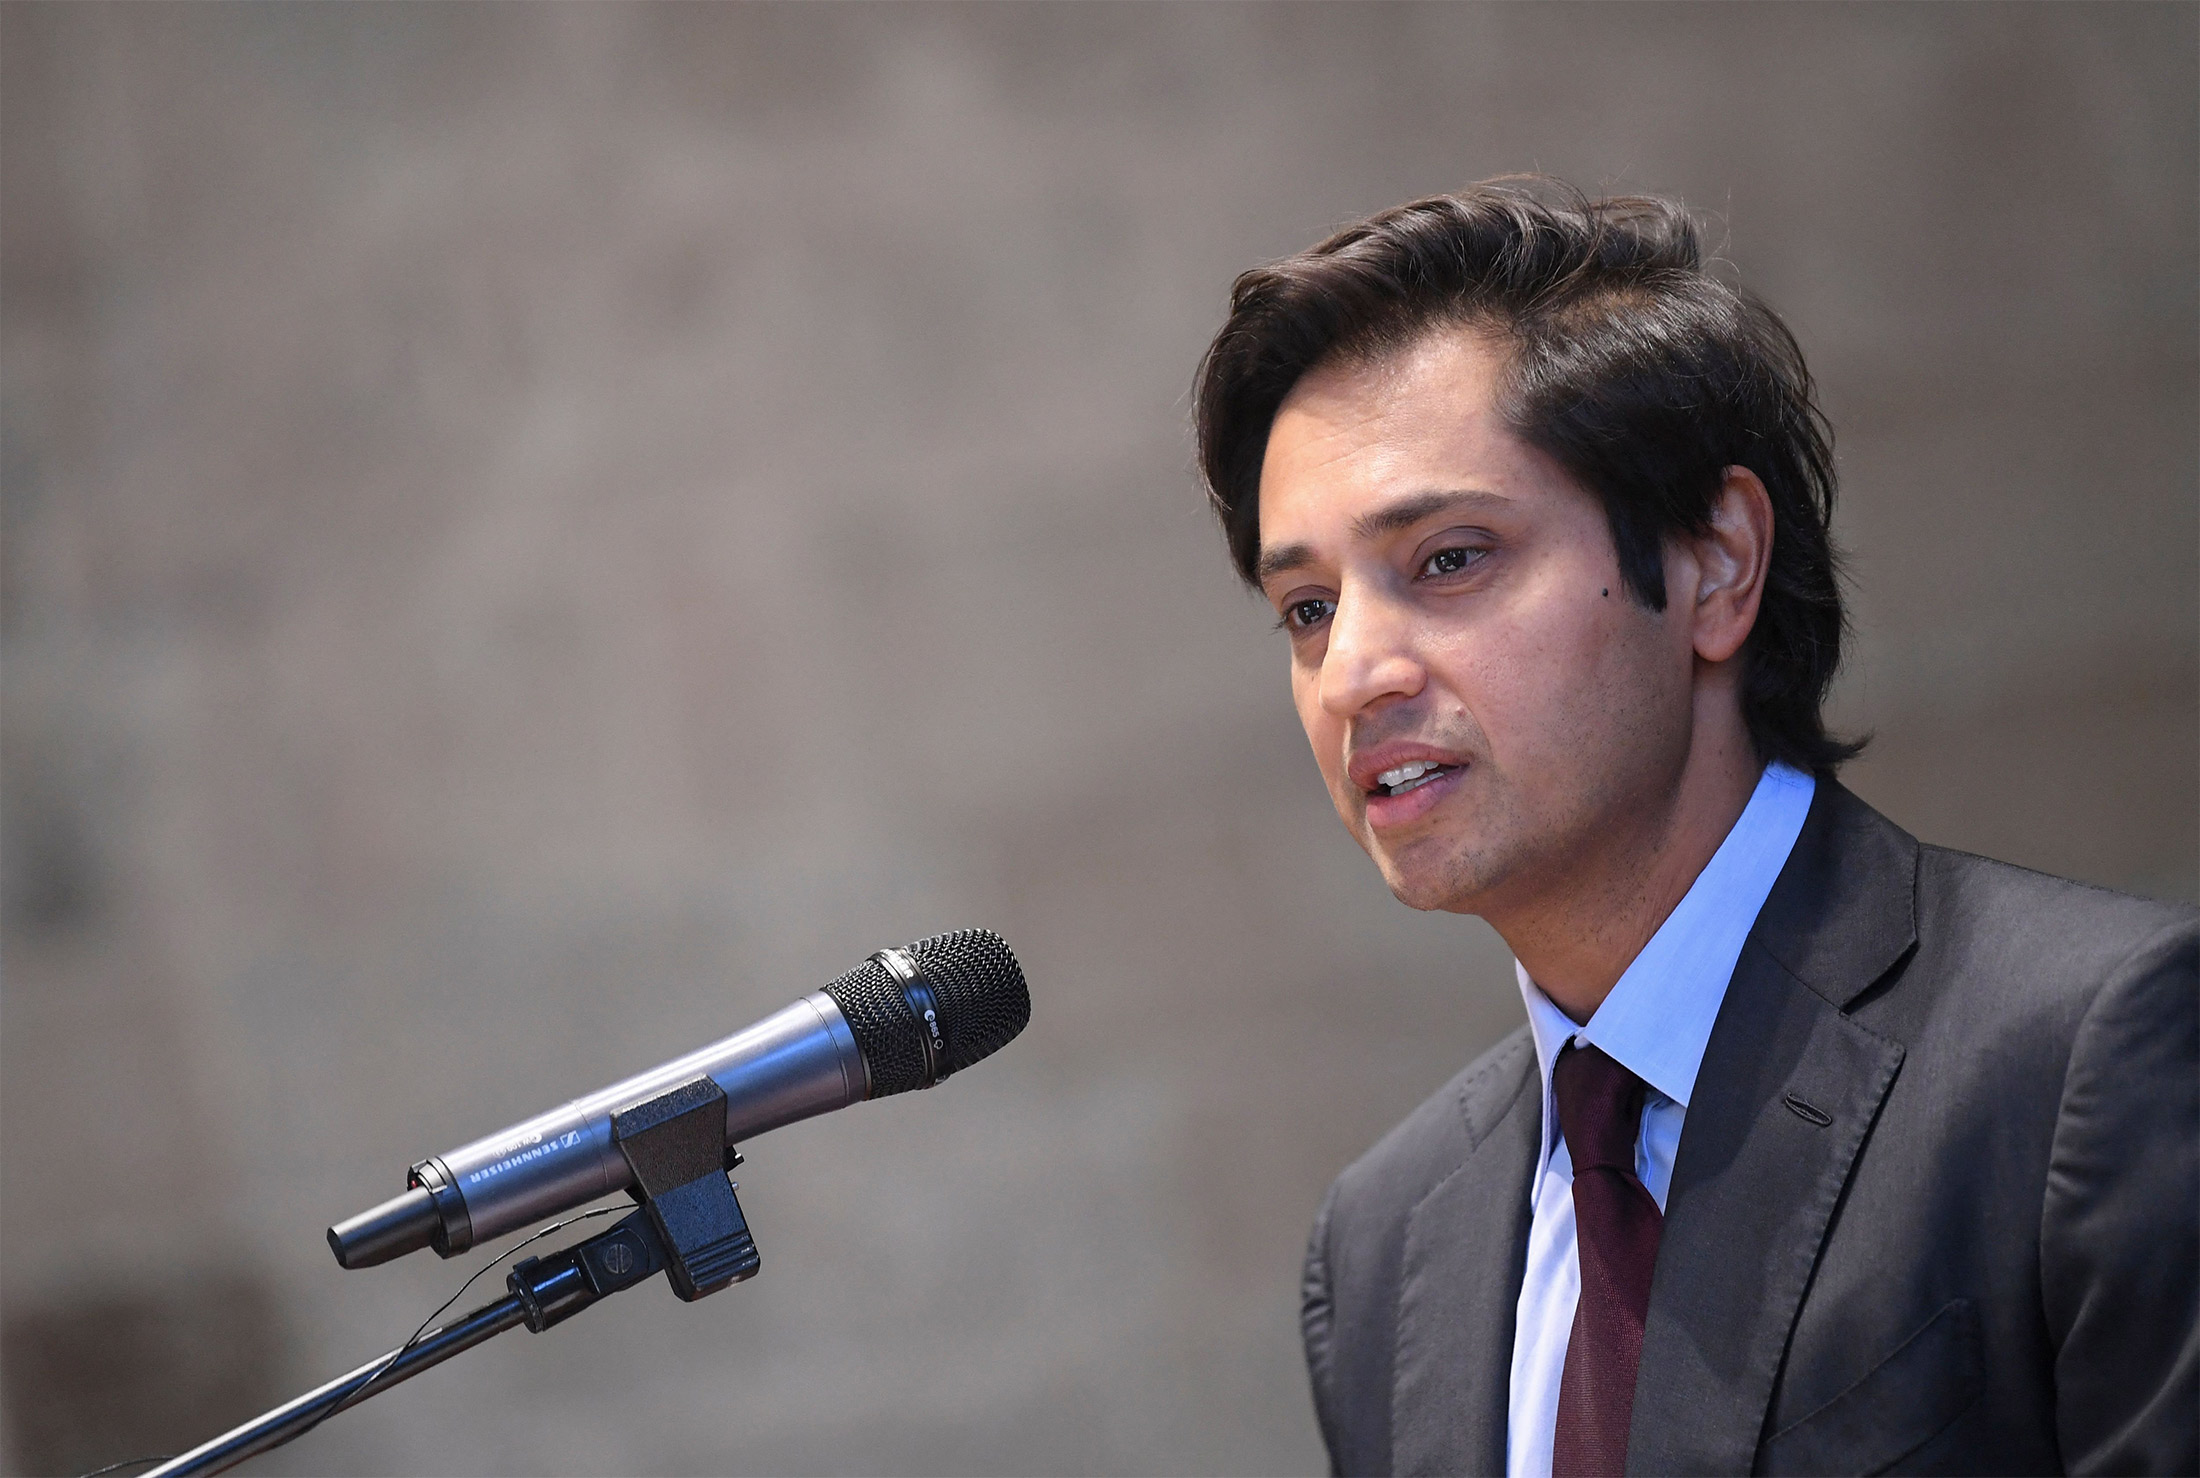 ArcelorMittal CEO Aditya Mittal Sees Steelmakers Buoyed by China